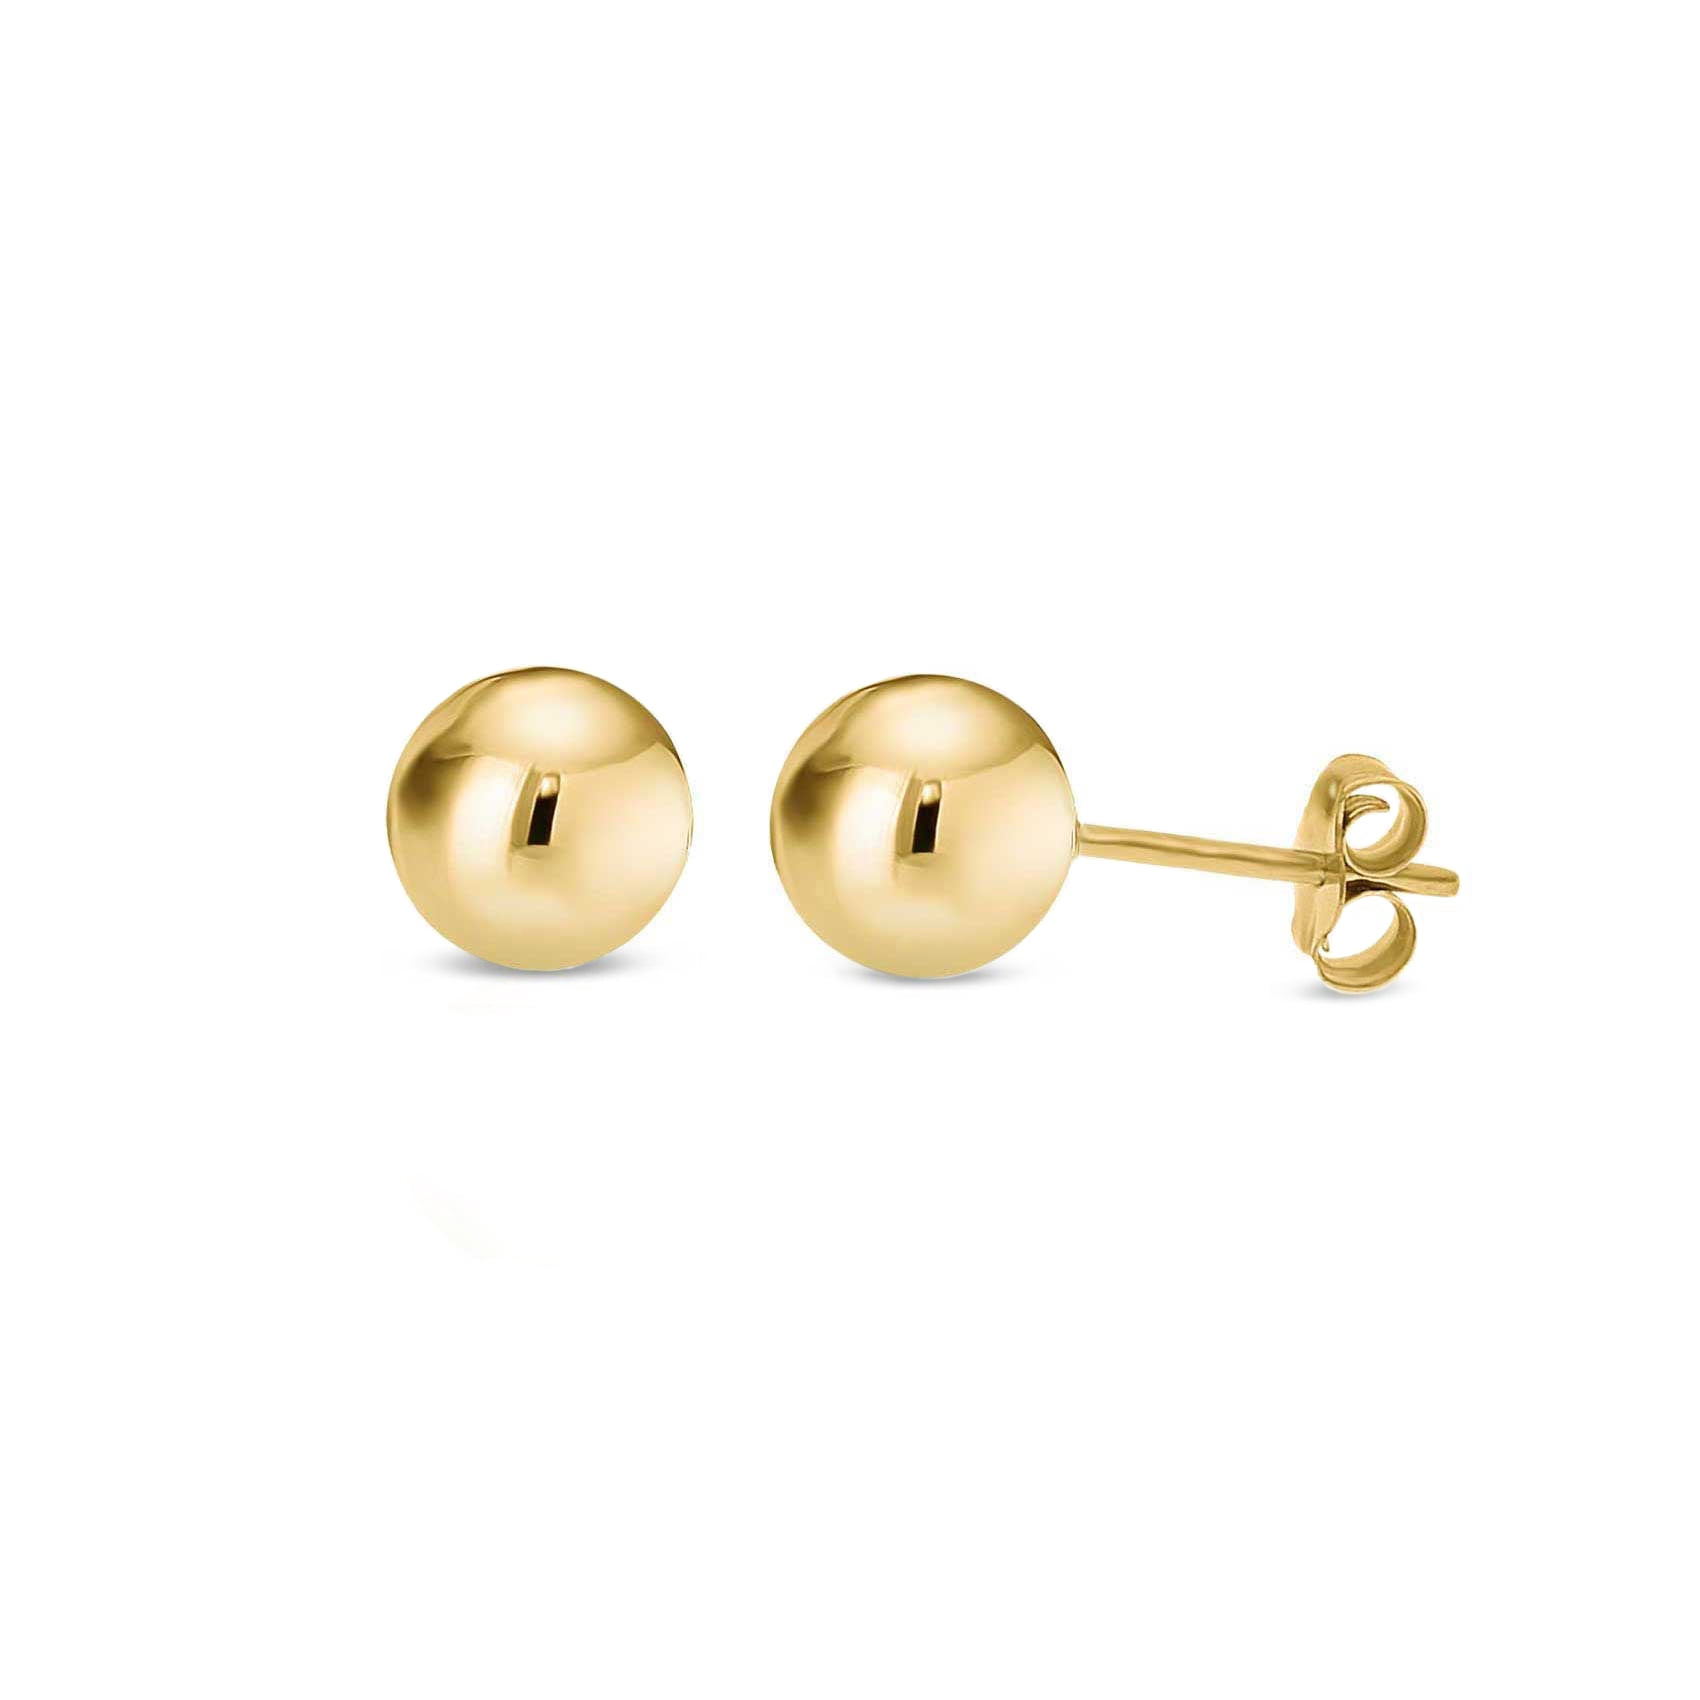 Details about   10K Yellow Gold 8mm Pearl Lever-back  Drop Earrings